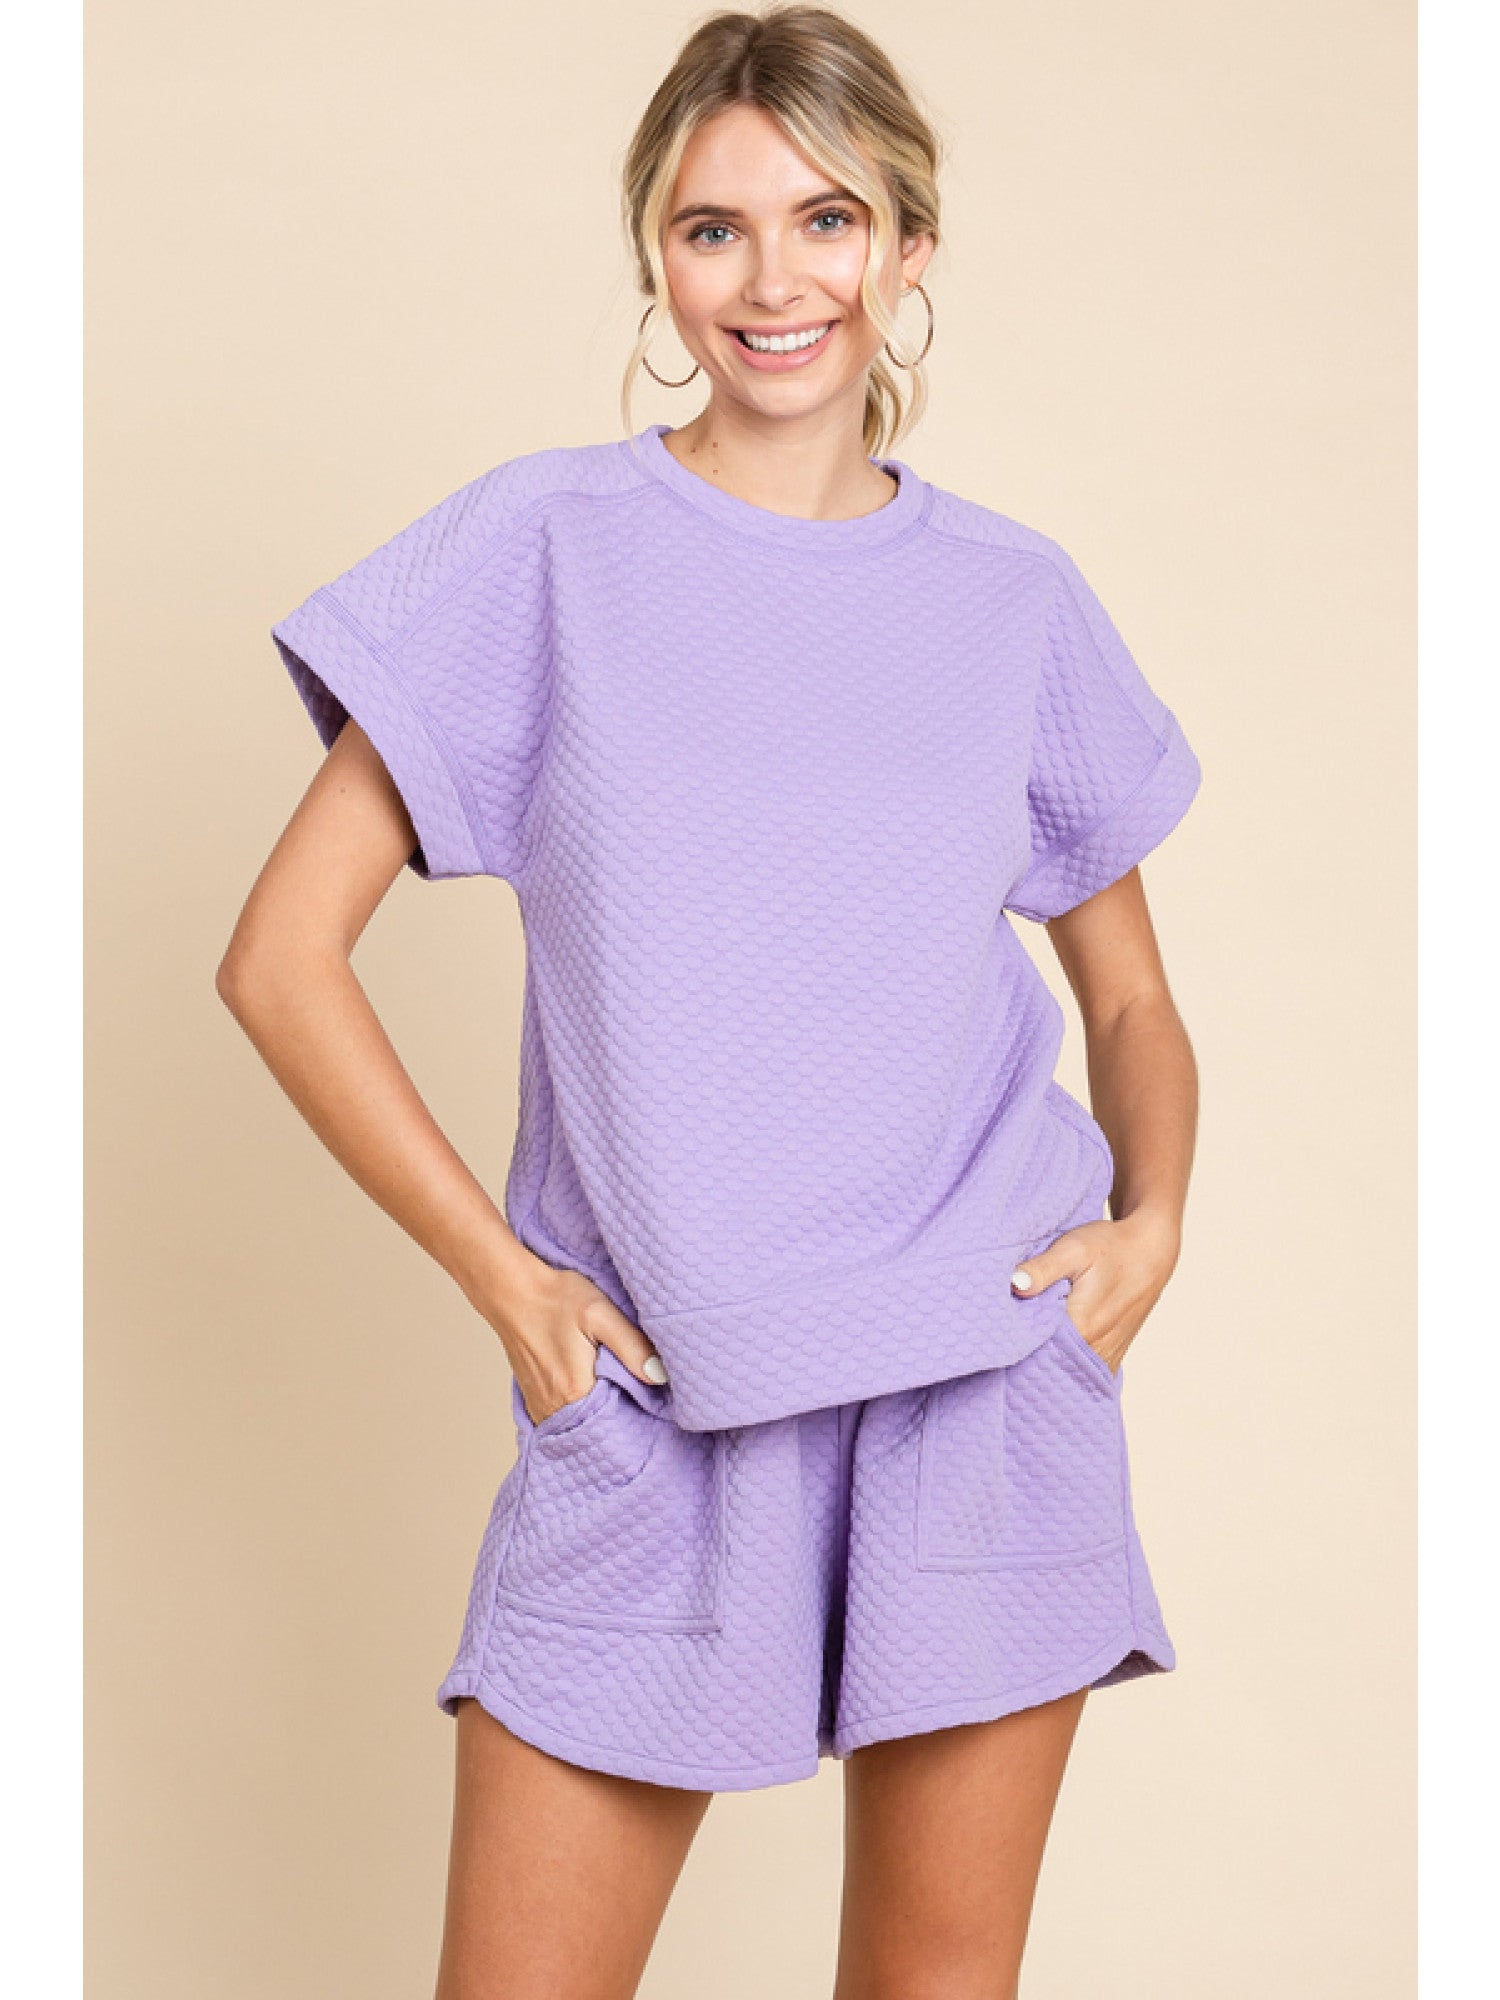 Simple Textured Top in Lavender